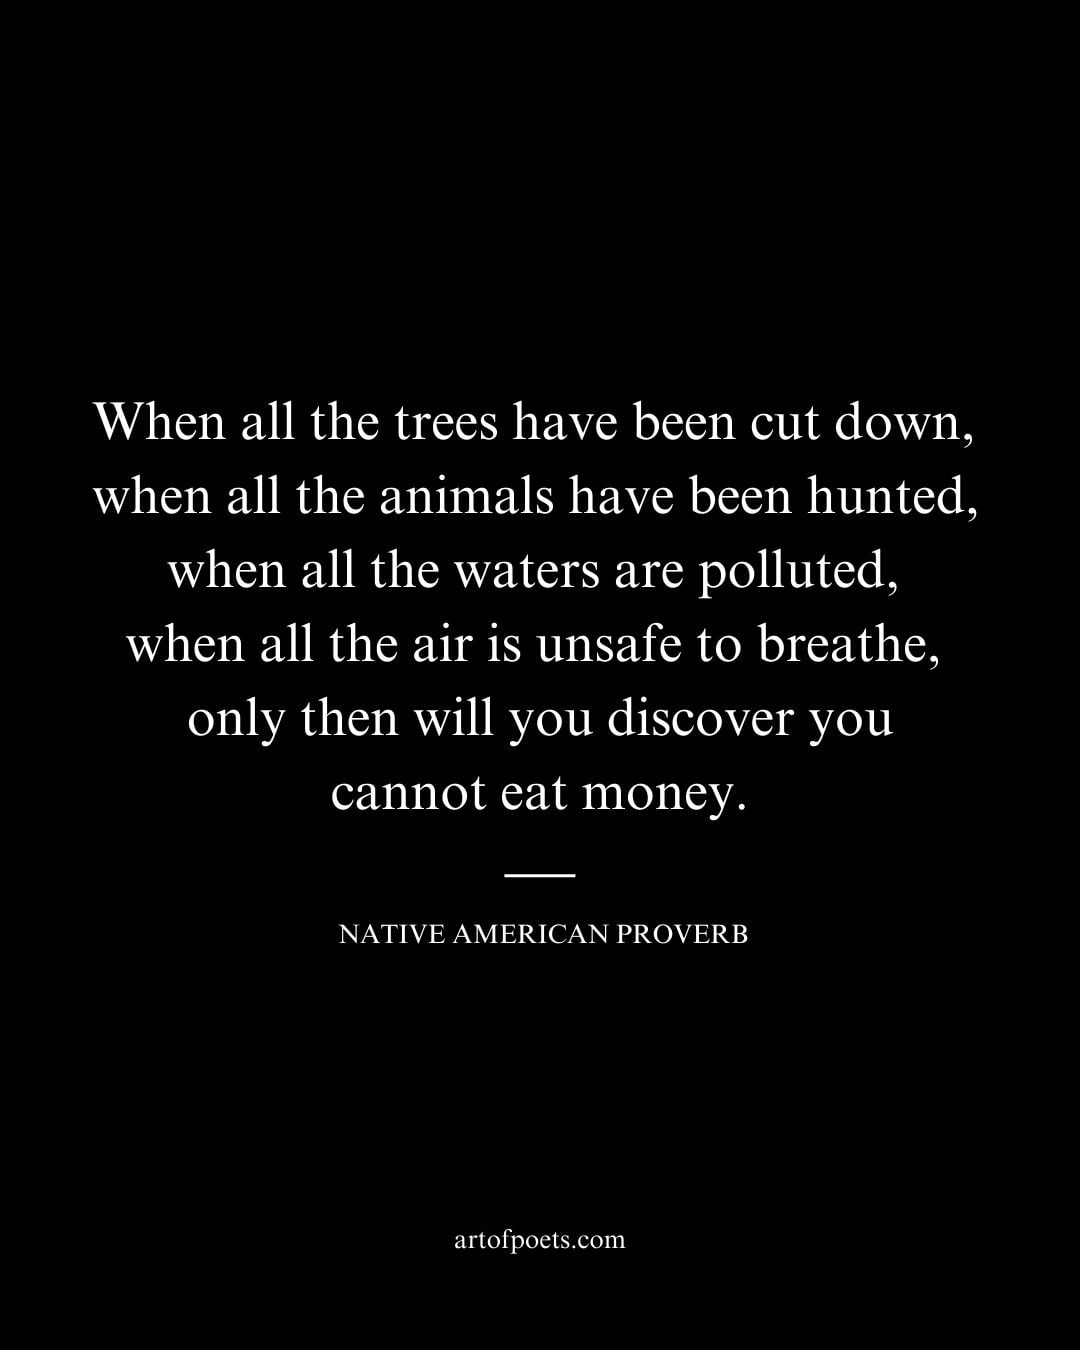 When all the trees have been cut down when all the animals have been hunted